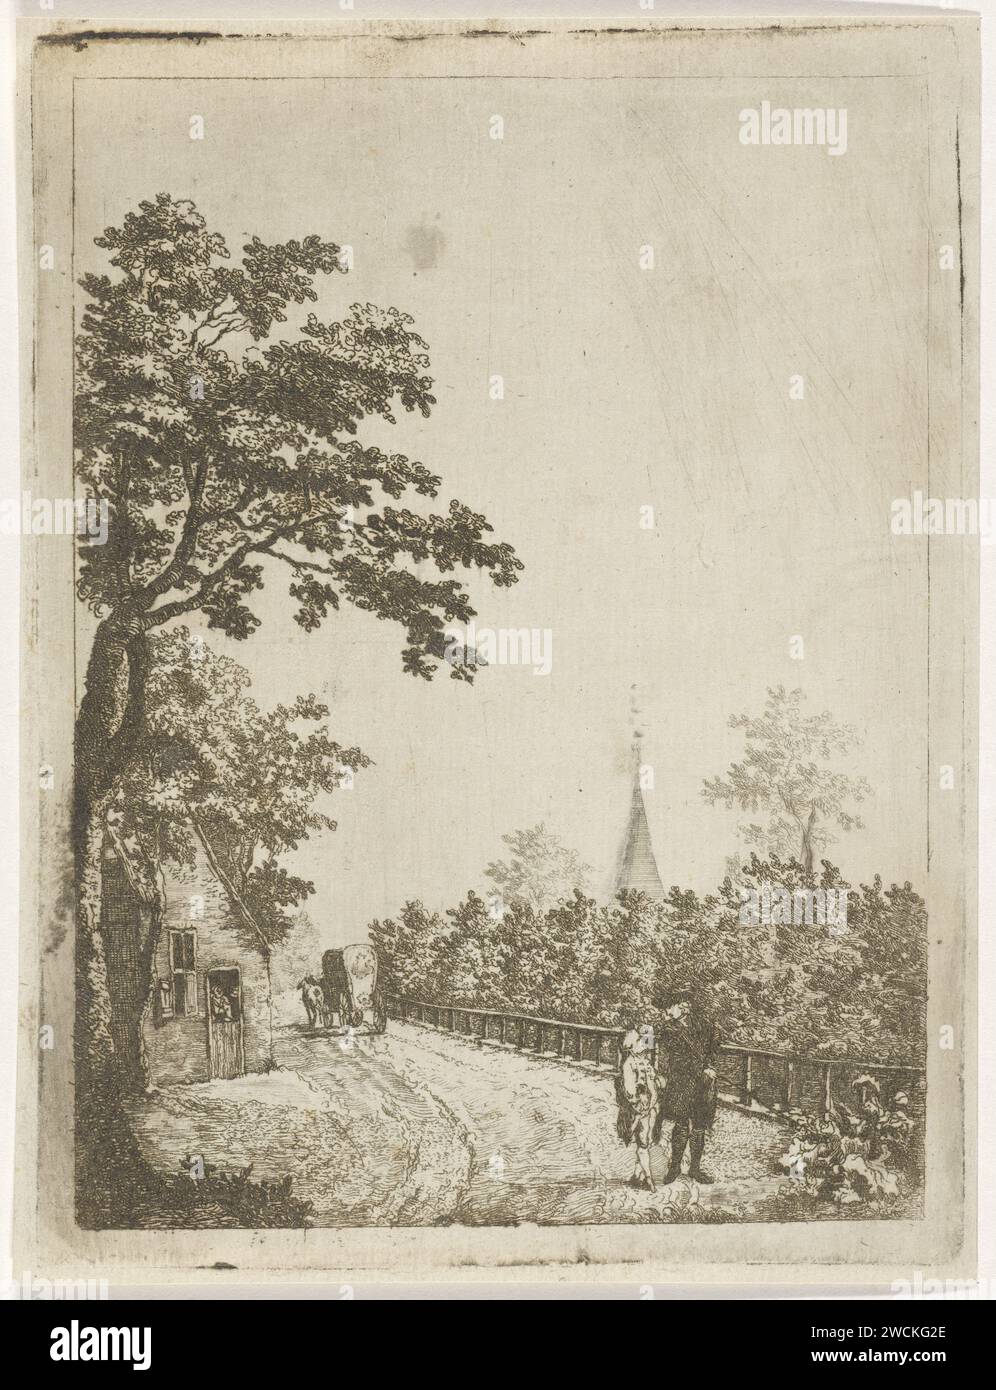 Landweg, Johan Antonie Kaldenbach, 1770 - 1786 print Landweg with current figures and a farmhouse, where a woman leans over the lower door. In the background a car with two horses and on the right a church tower protrudes above the trees.  paper etching road, path. four-wheeled vehicle drawn by two animals. parts of church exterior and annexes Stock Photo